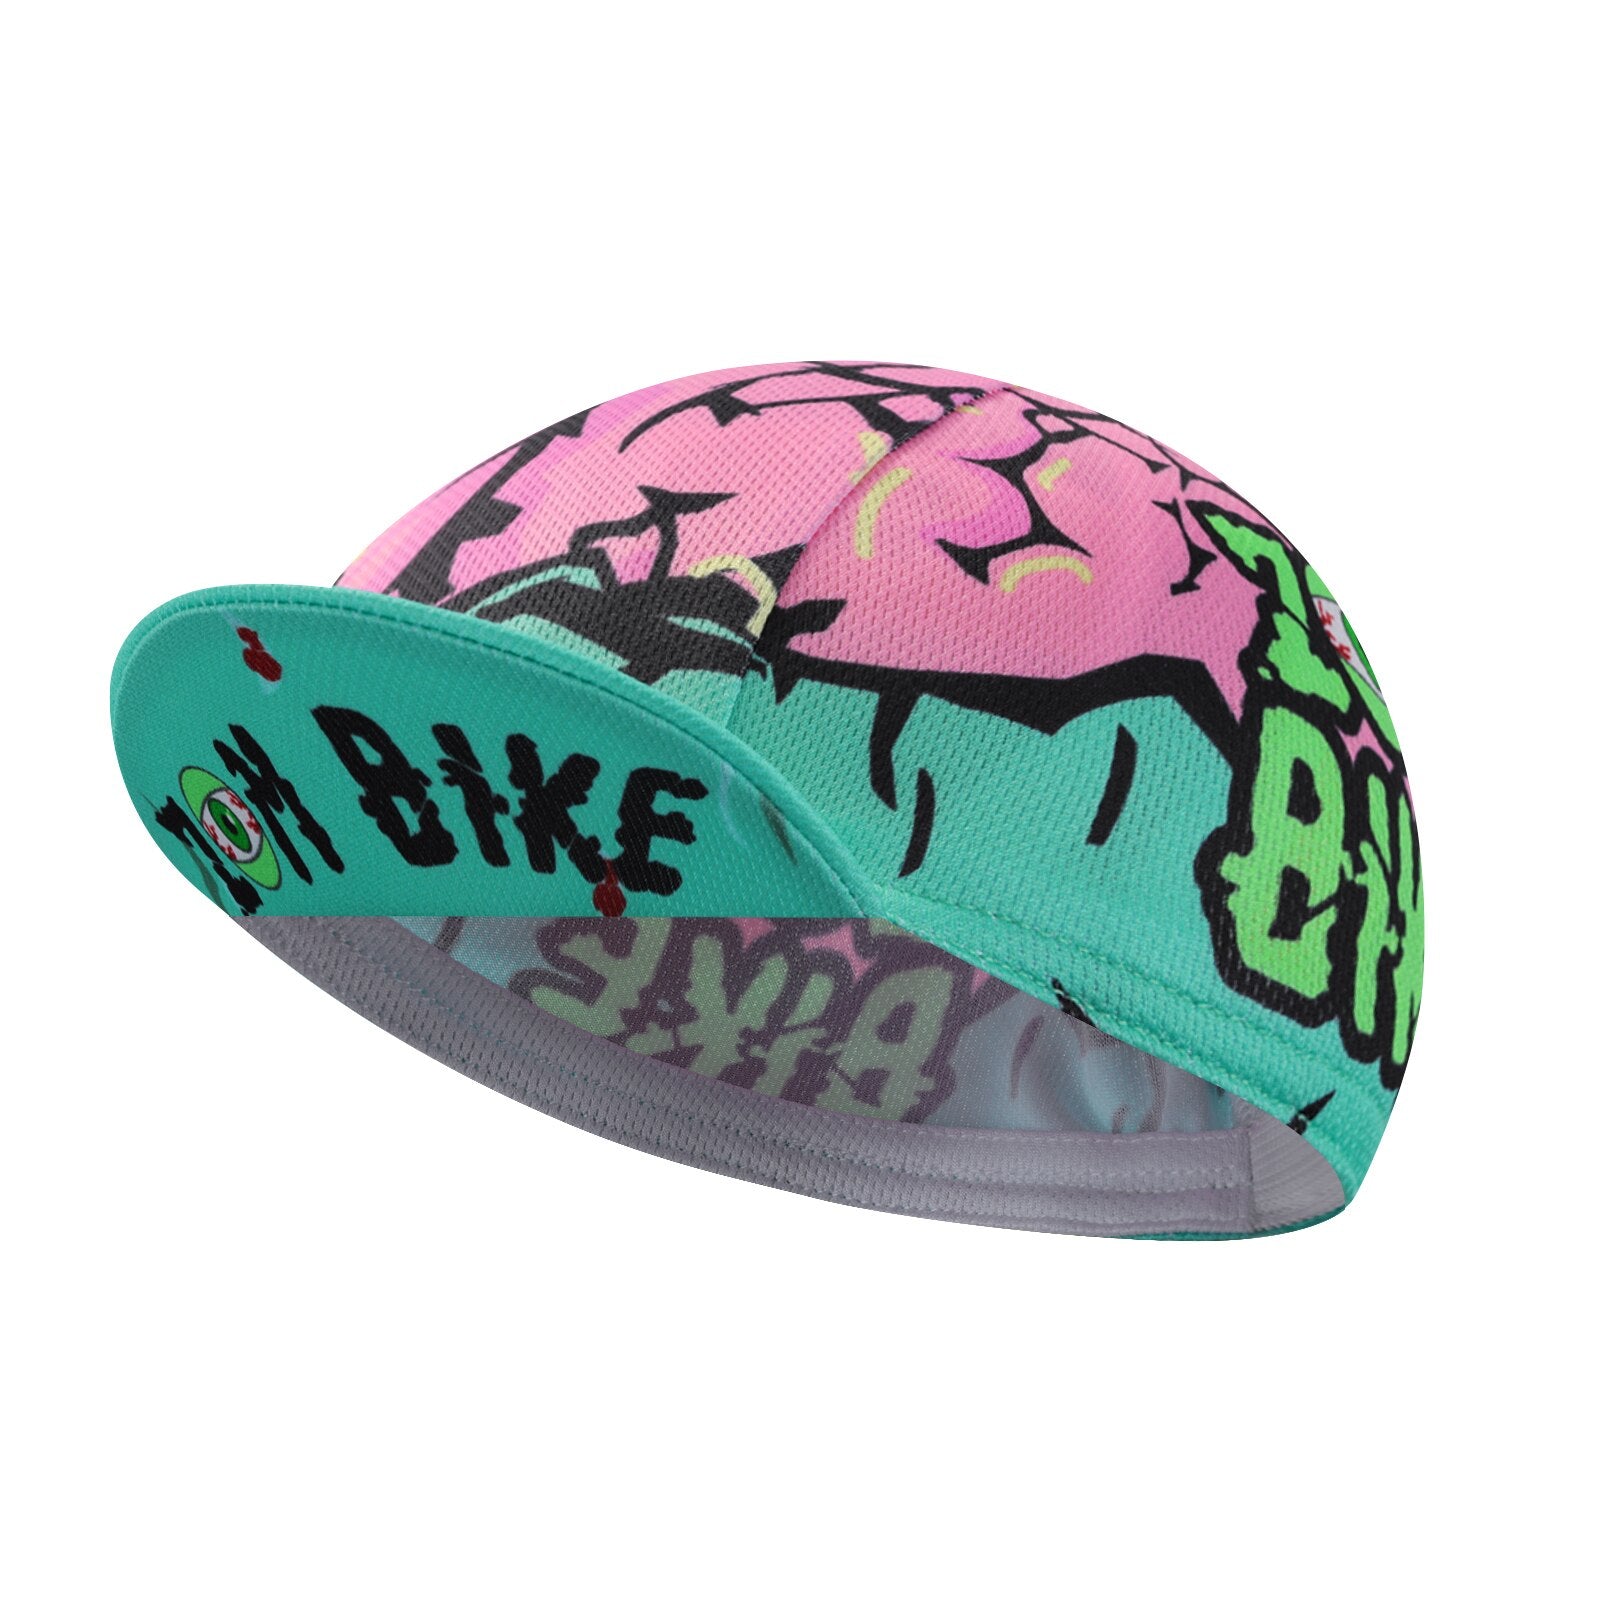 Skull Cycling Cap - Polyester Skeleton Cycling Hat-Under Helmet - Funny Cycling Helmet Liner Breathable&Sweat Uptake